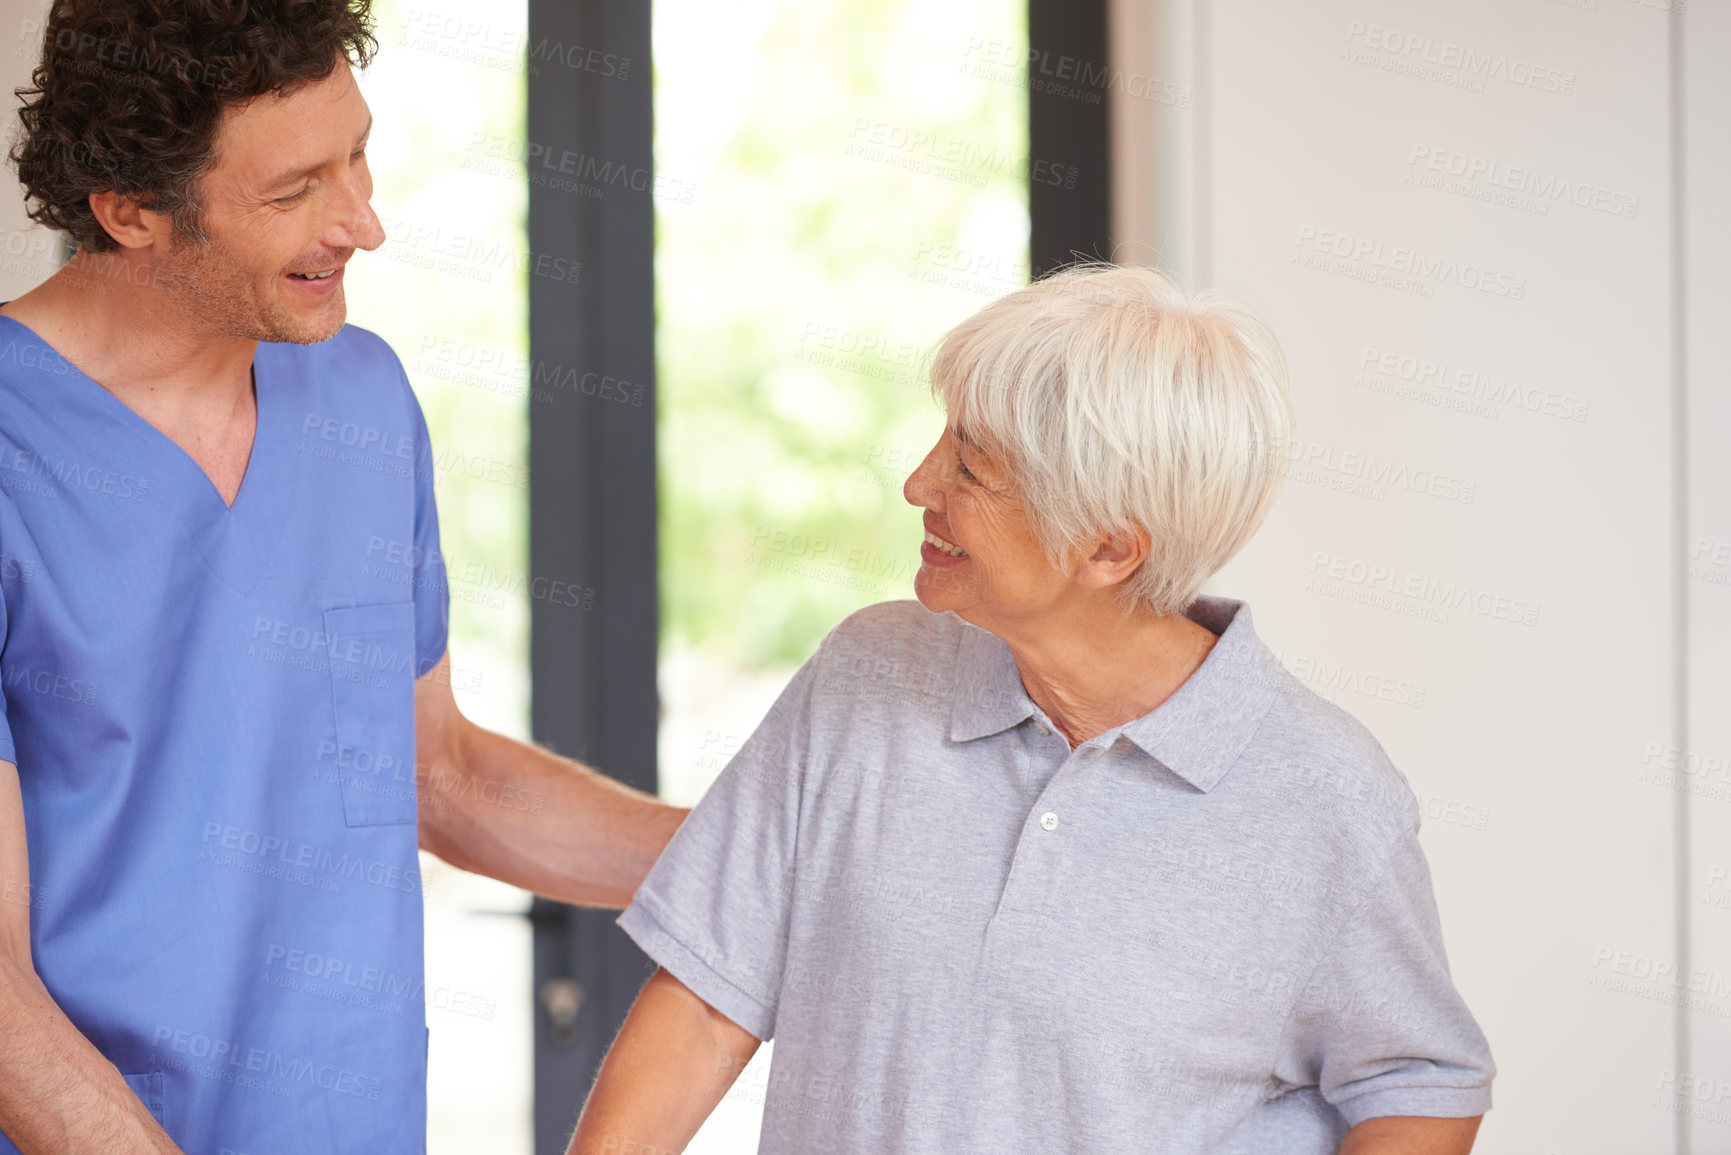 Buy stock photo Cropped shot of a male nurse checking on a senior patient